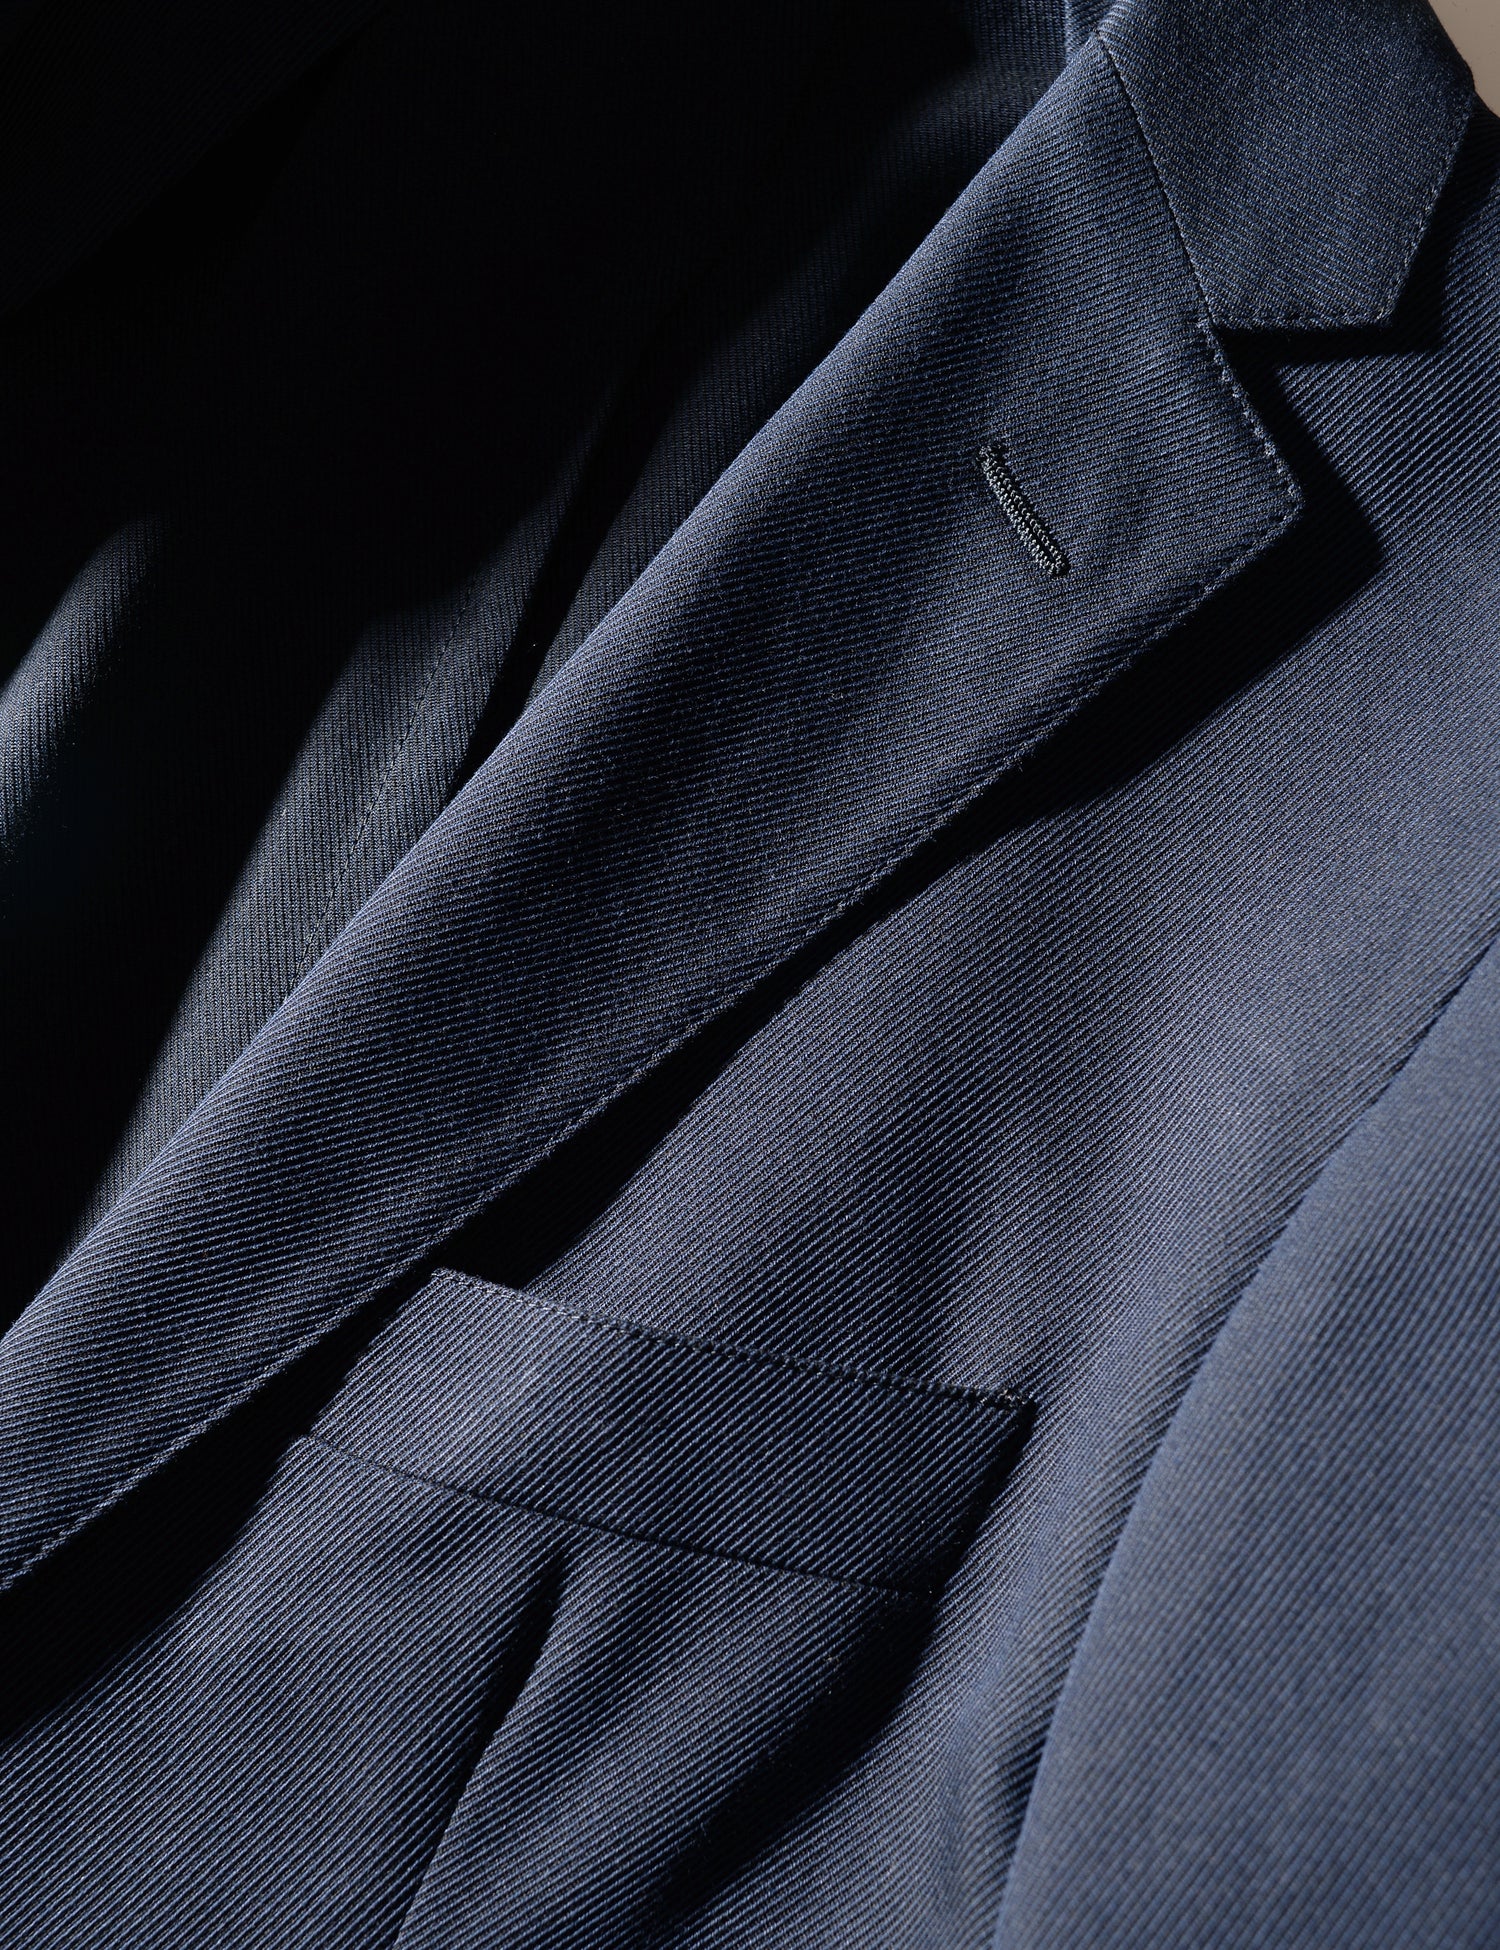 Detail shot showing lapel and fabric texture on Brooklyn Tailors BKT35 Unstructured Jacket in Cavalry Twill - Navy